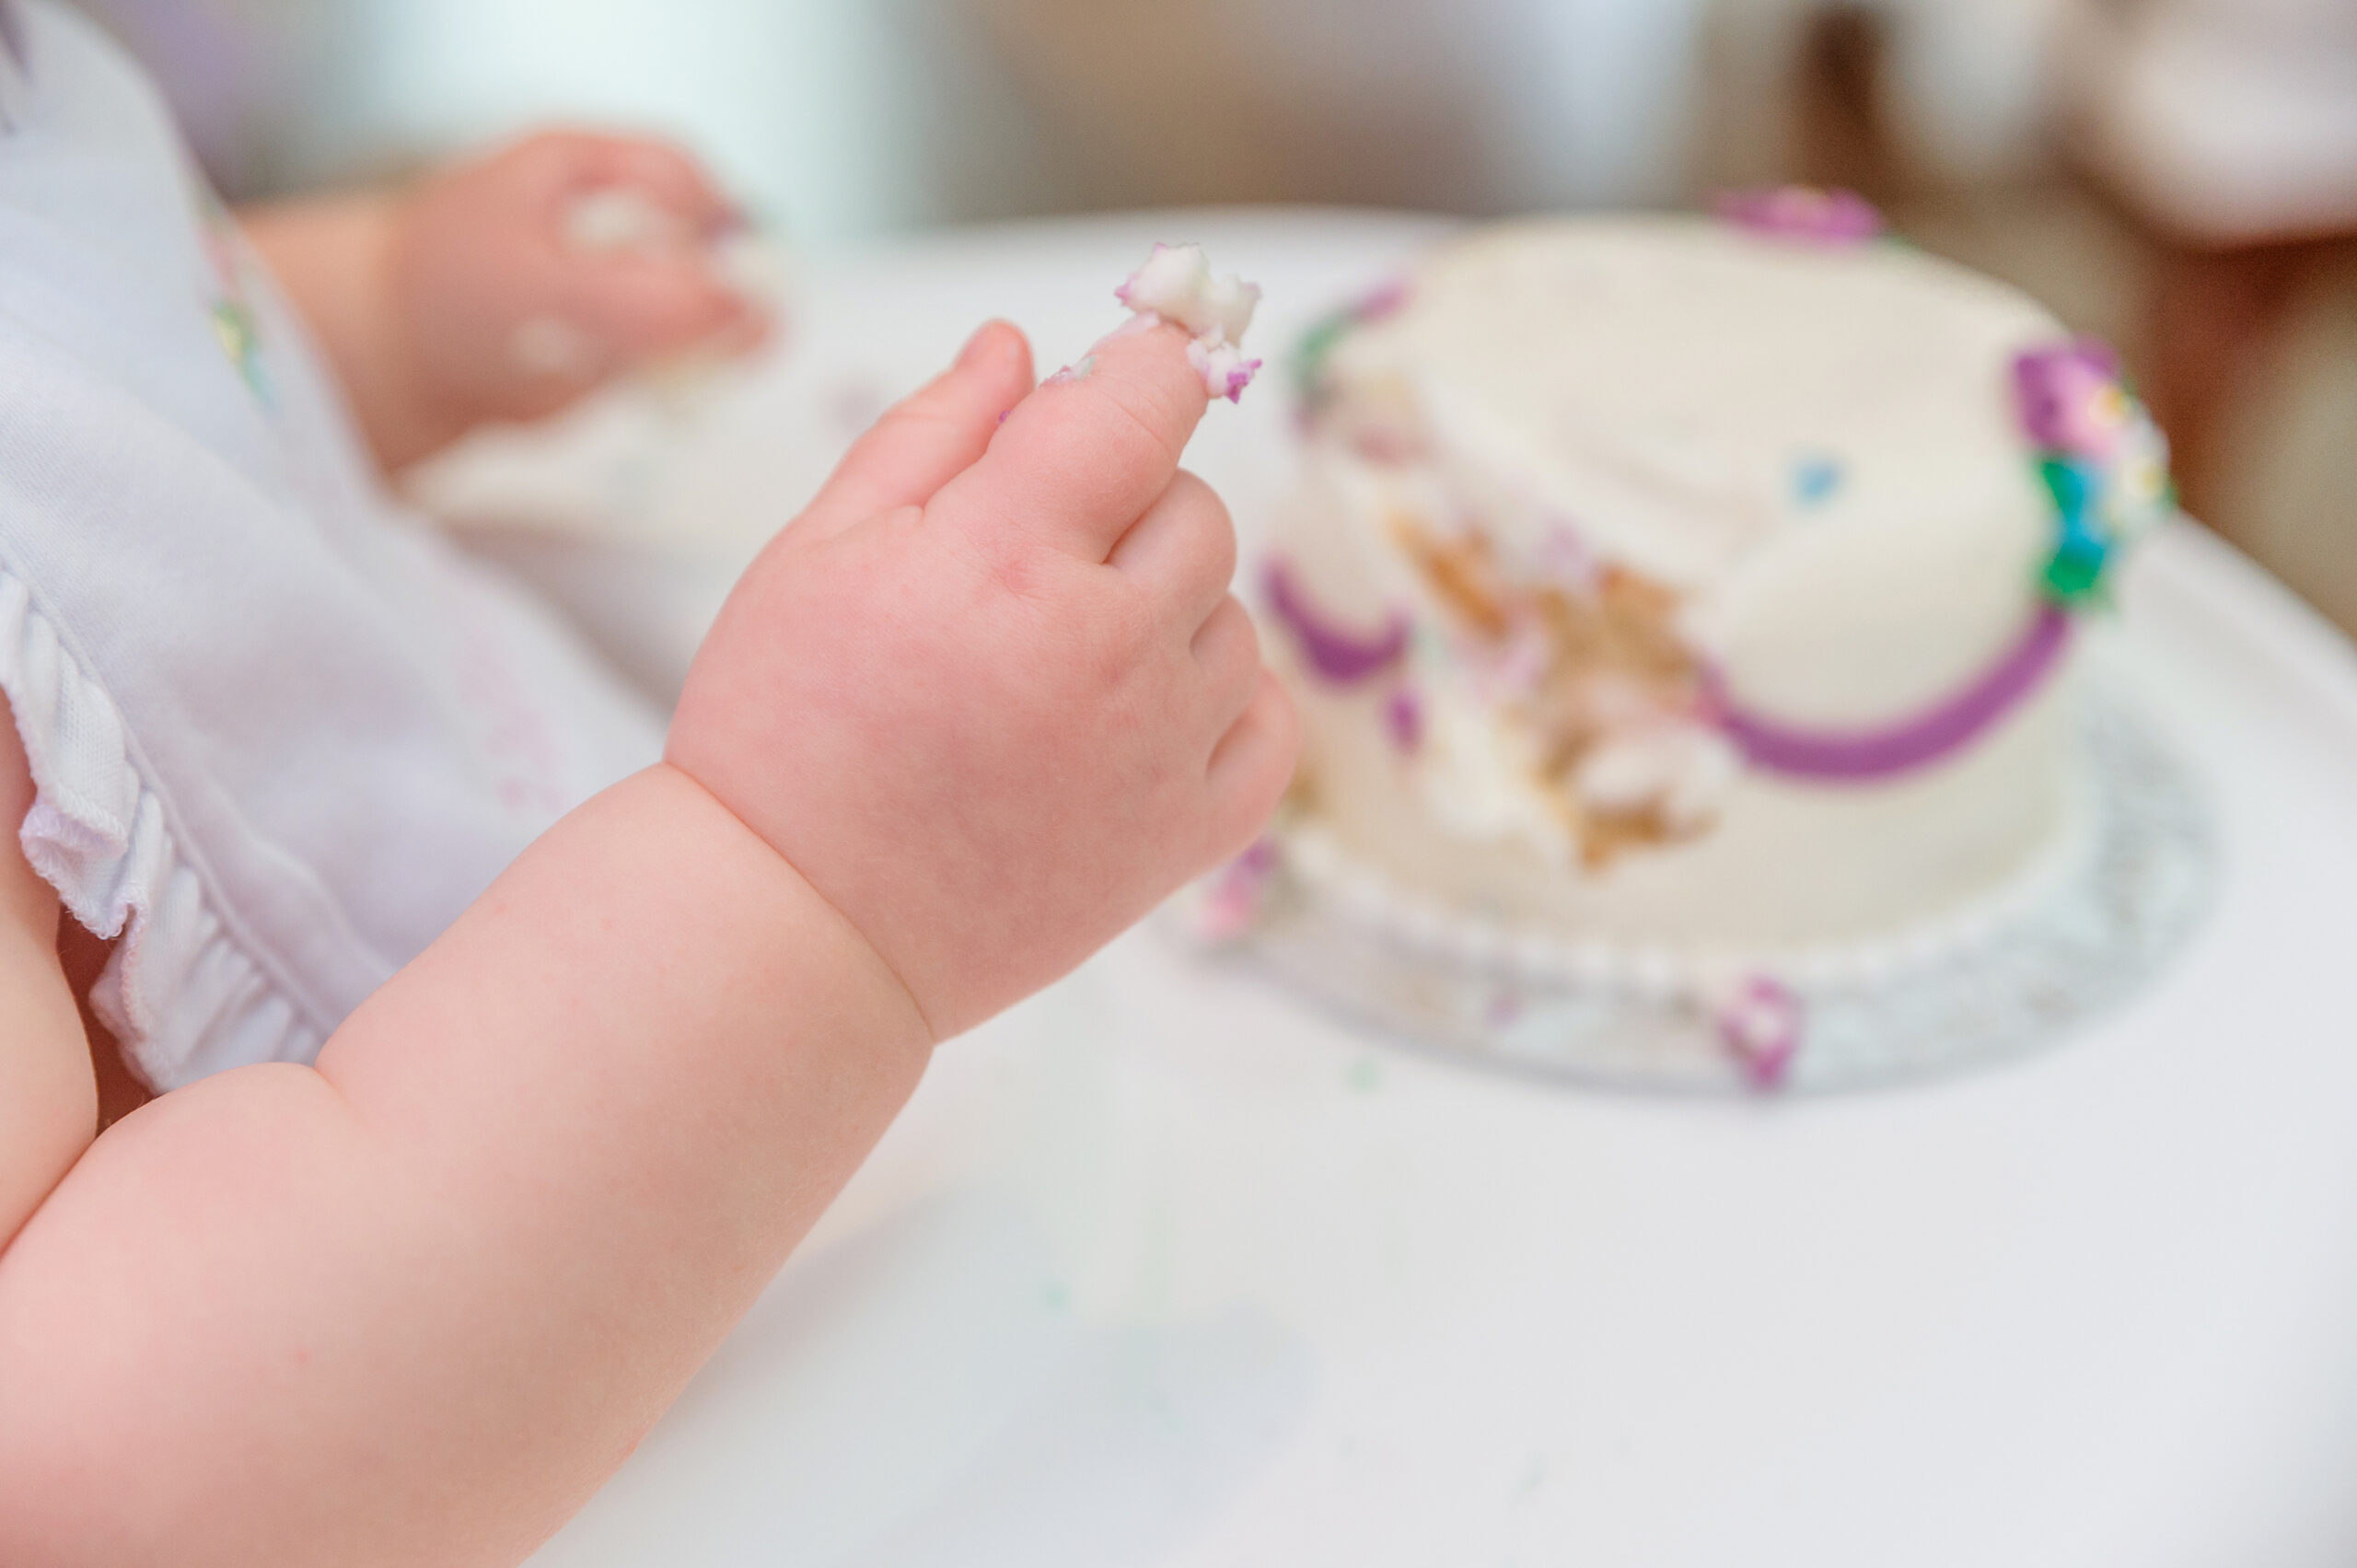 Baby hand covered in cake.